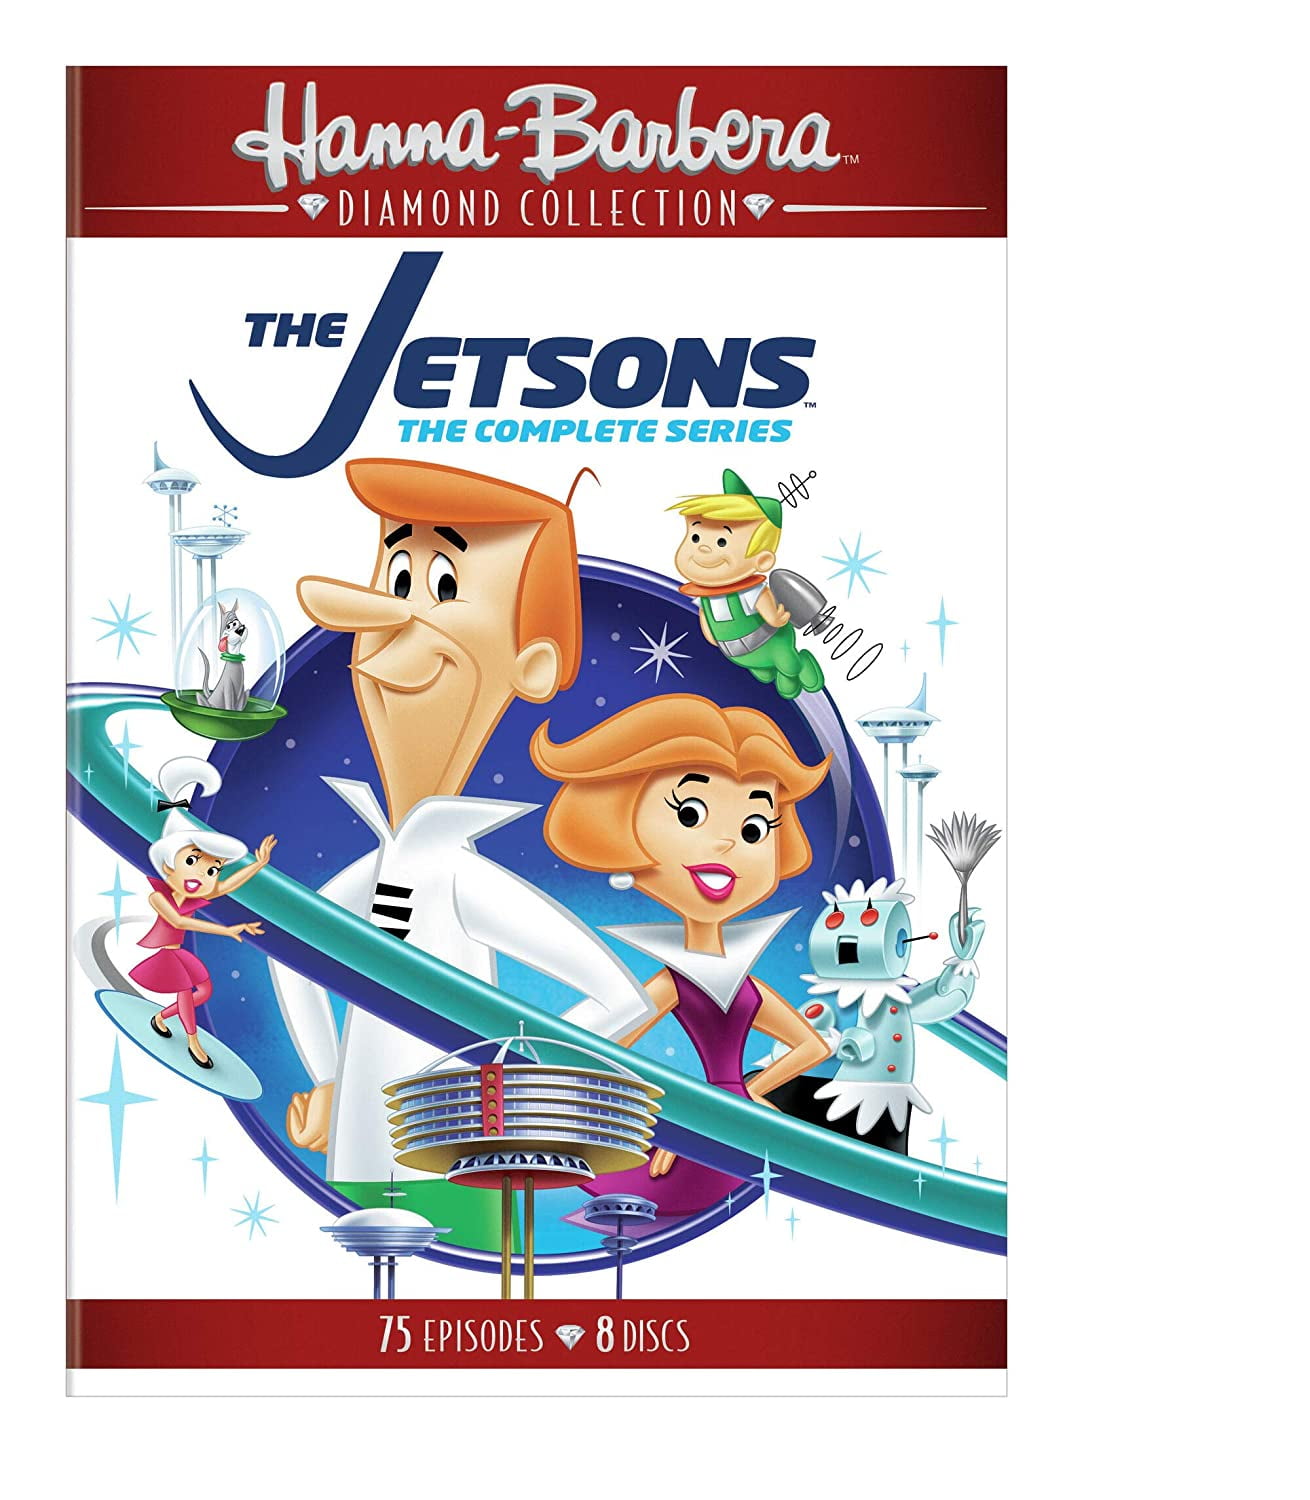 The Flintstones & Jetsons Figurines Sets Hanna Barbera Collection New in Box 